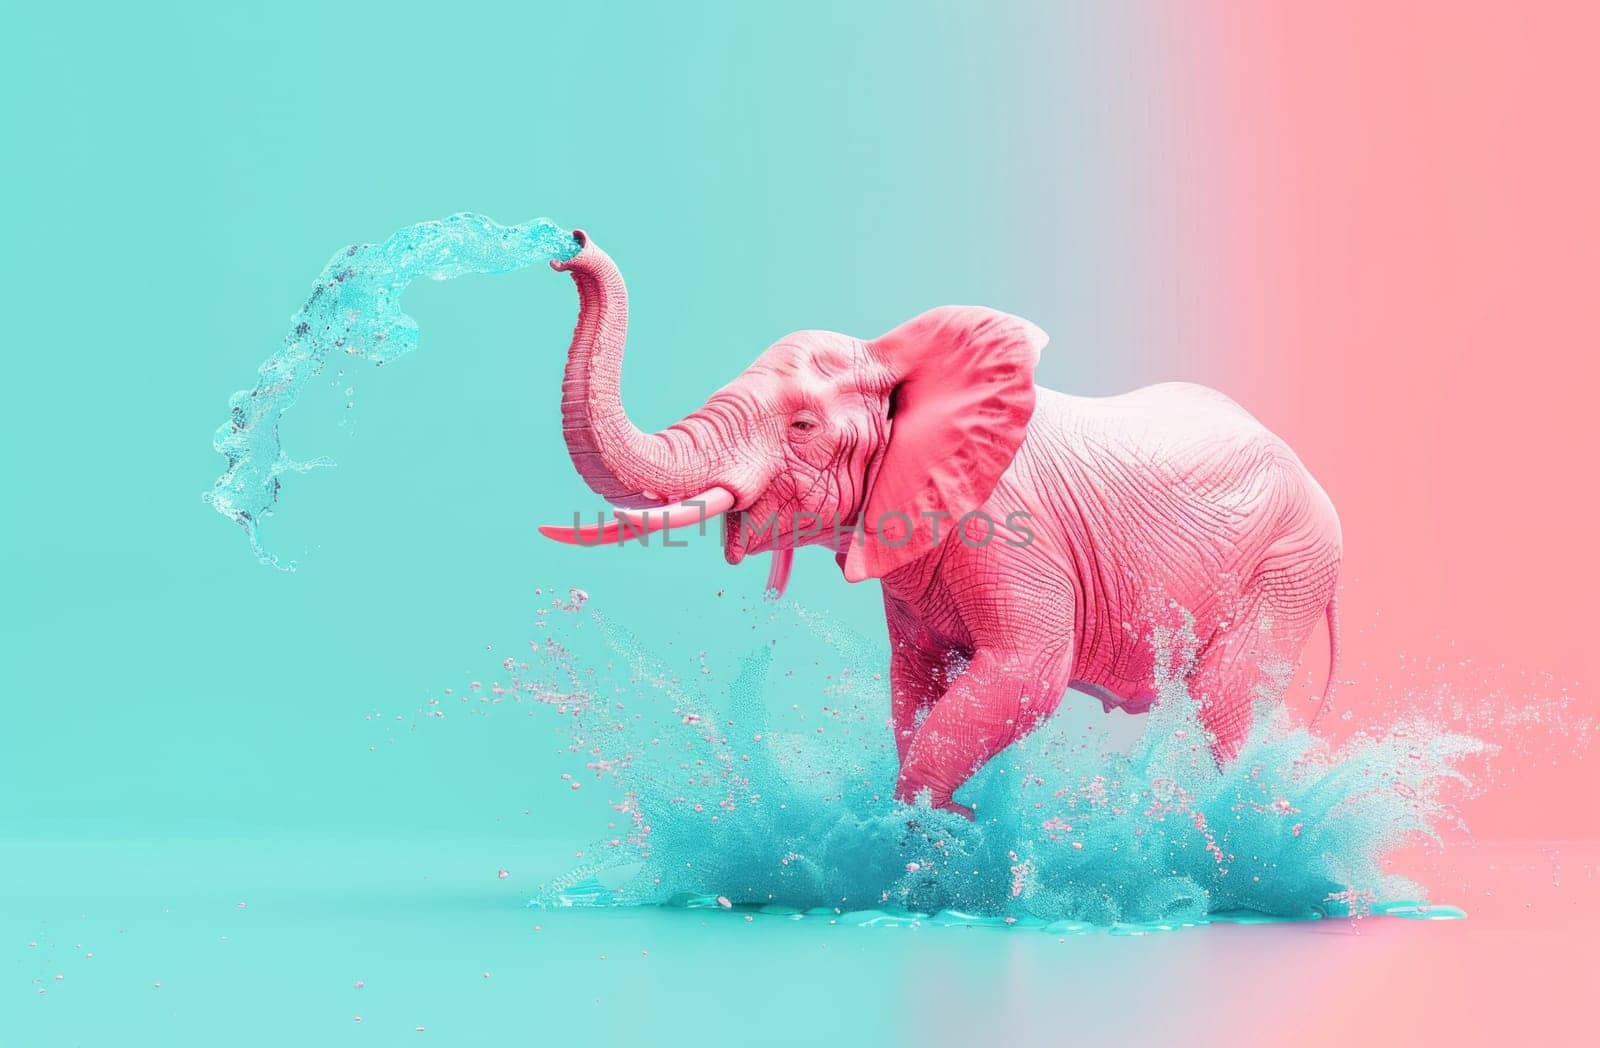 Pink elephant splashing water in a colorful background with splashes of blue and pink by Vichizh